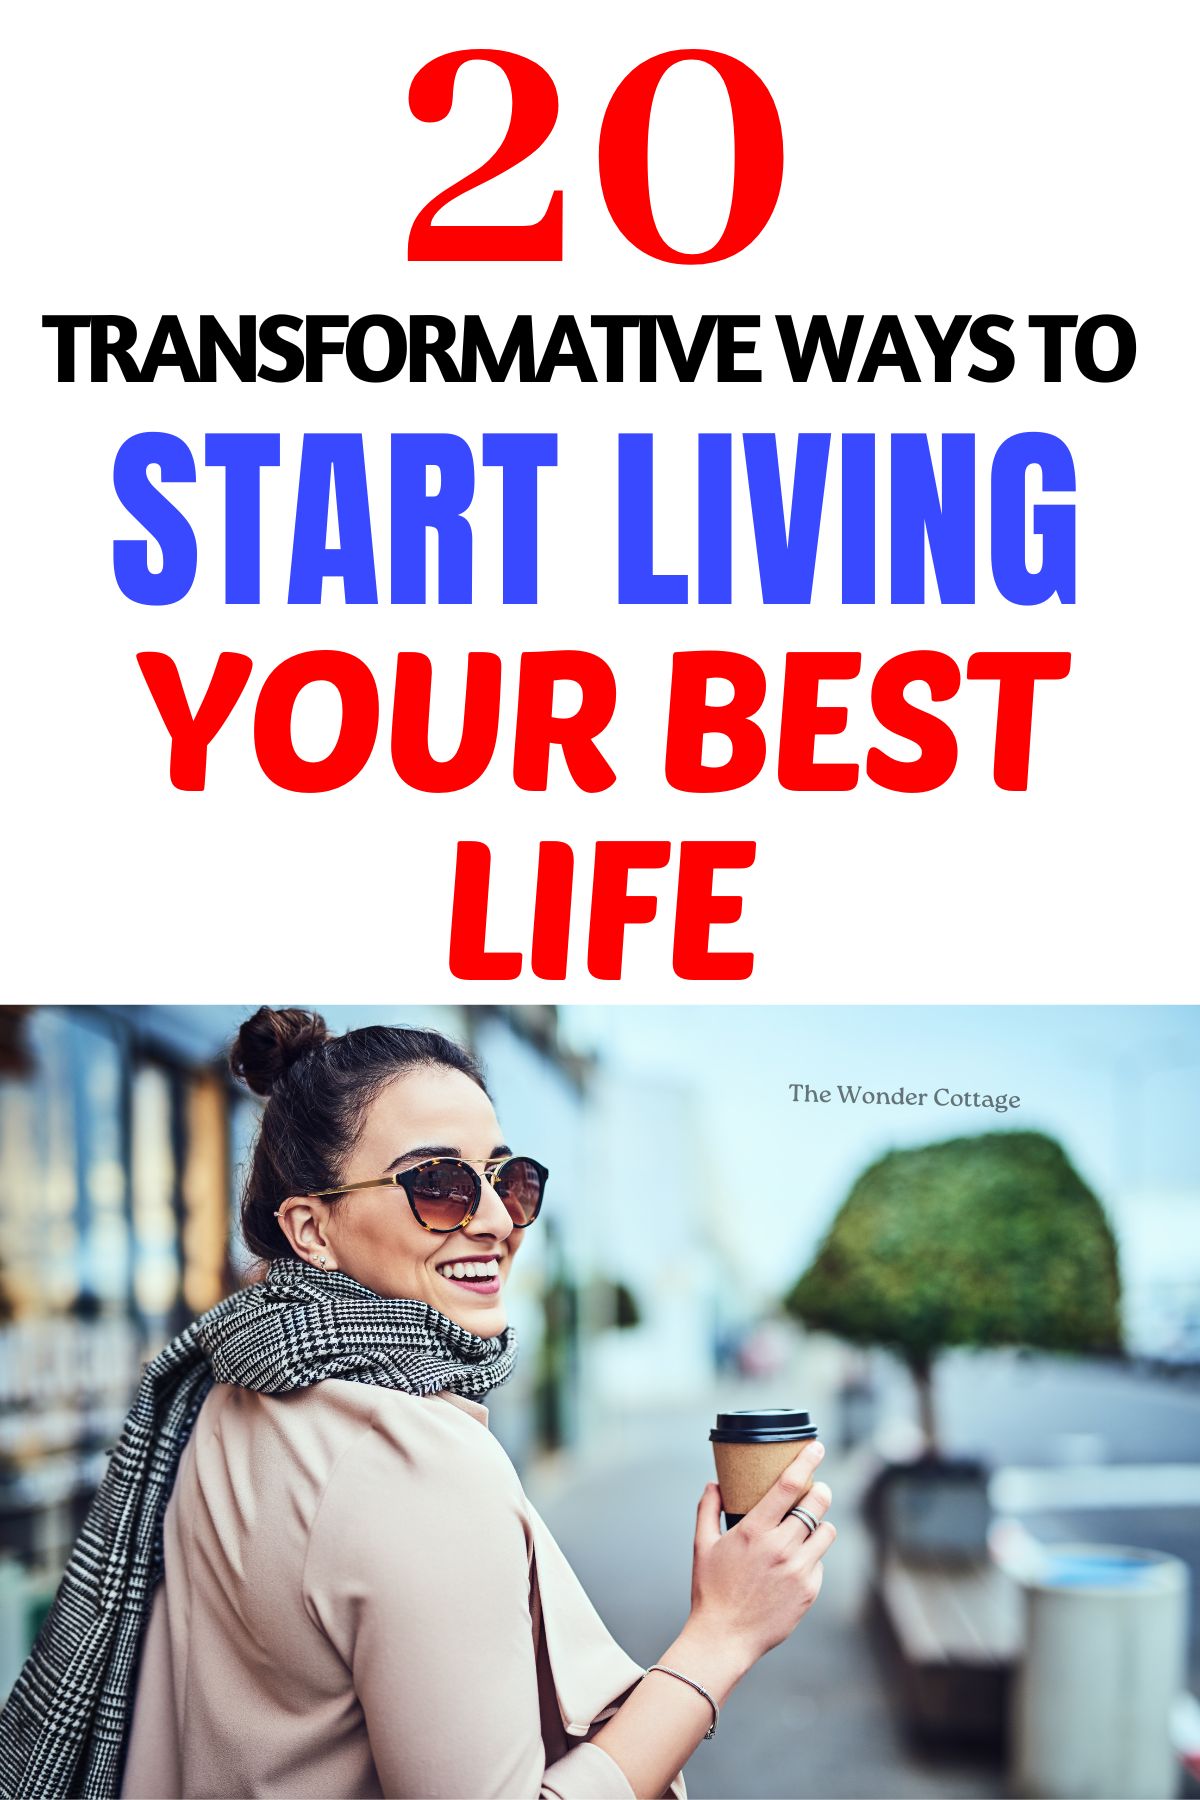 Transformative Ways To Start Living Your Best Life